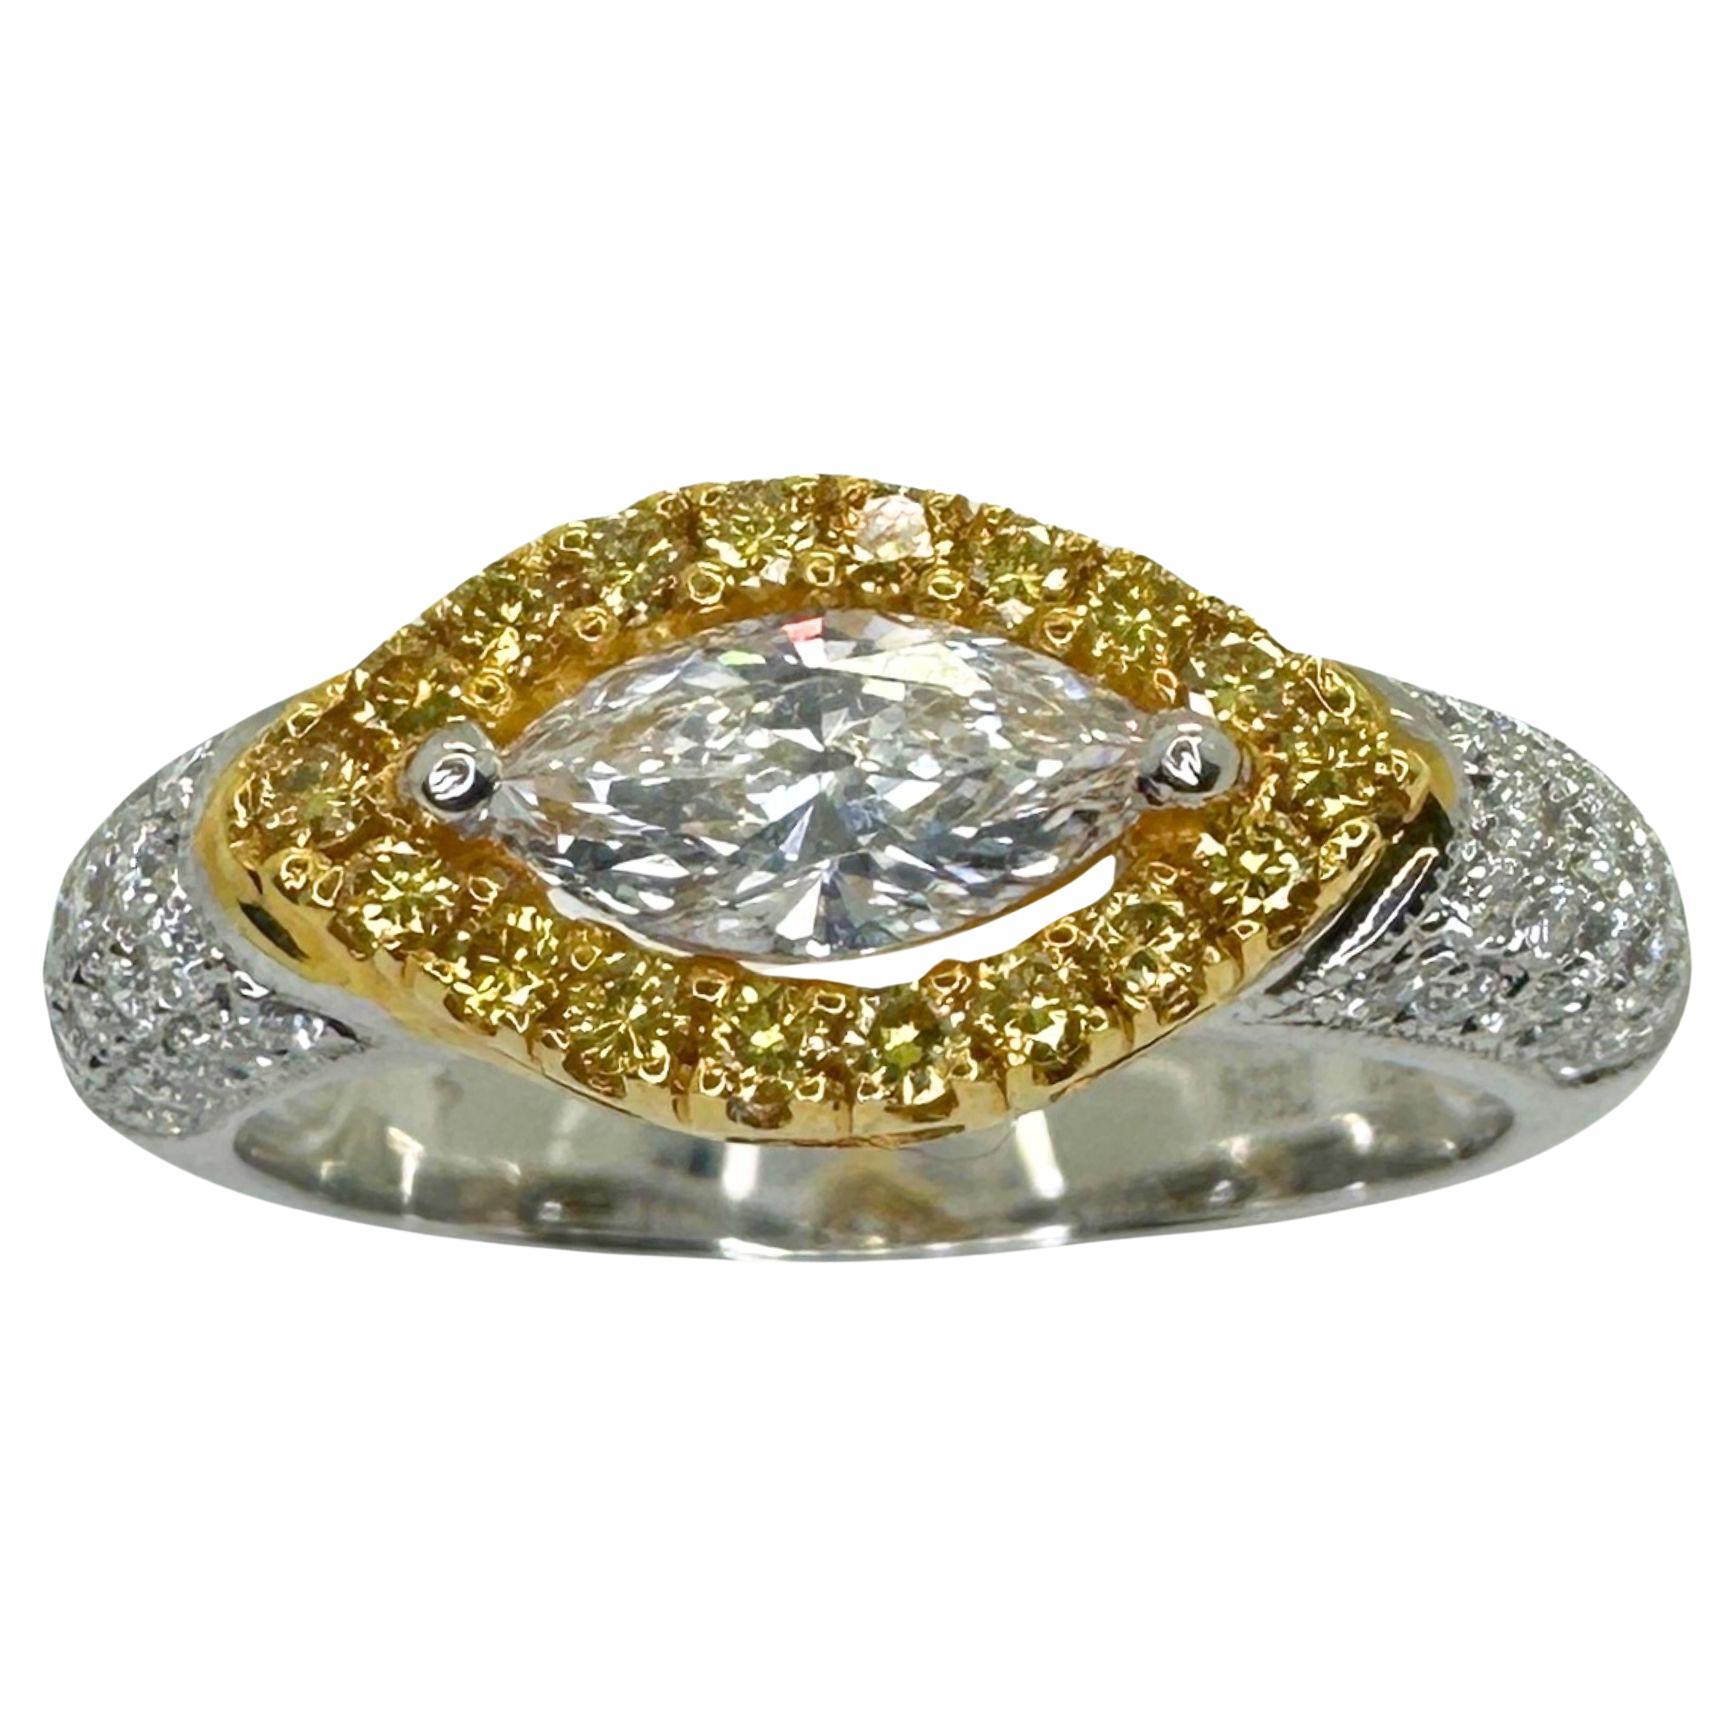 18k East-West Marquise Shaped Diamond Center and Yellow Diamond Halo Ring